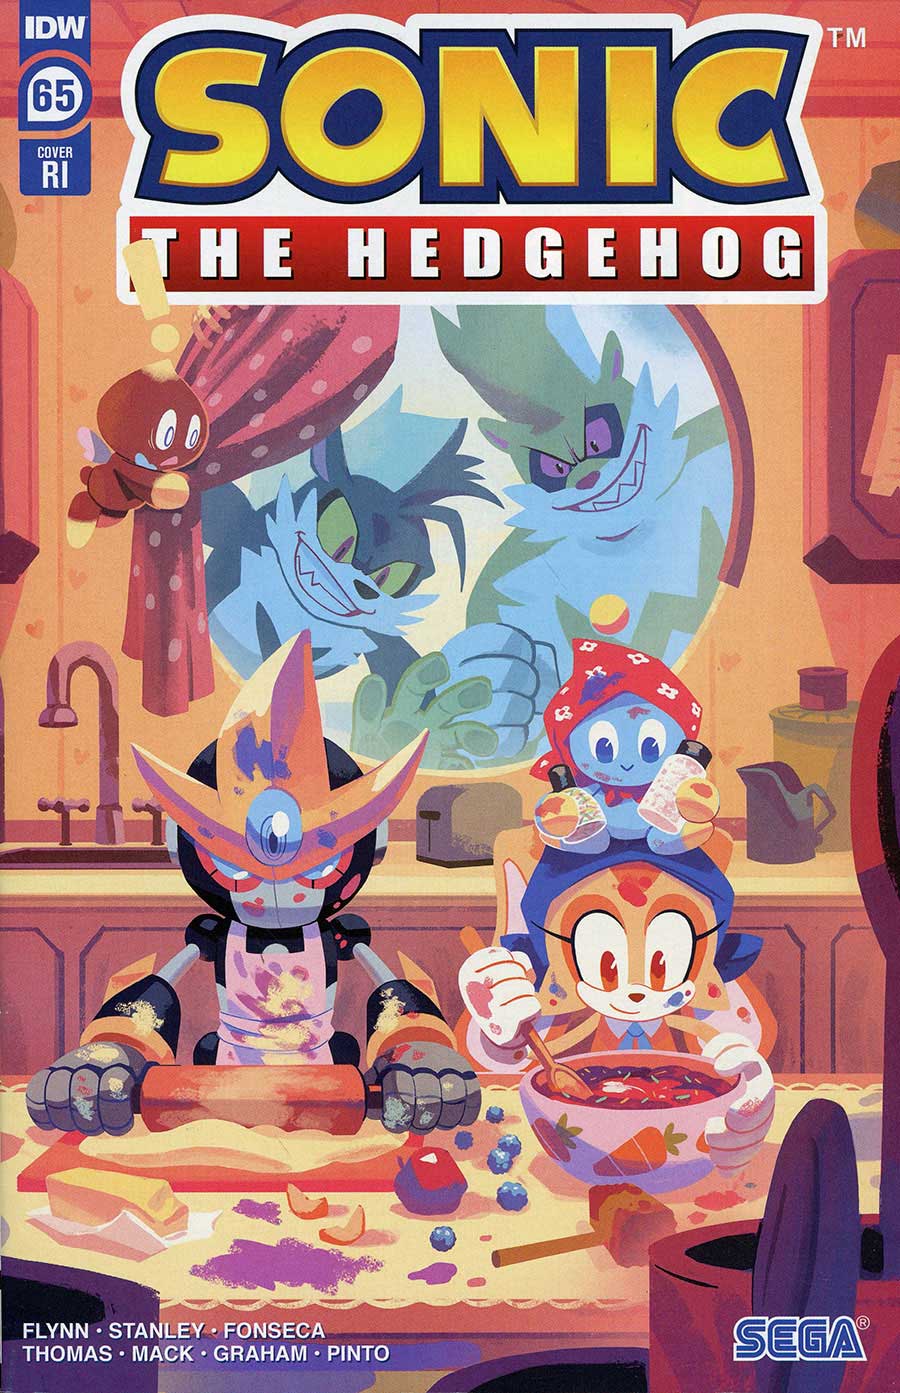 Sonic The Hedgehog Vol 3 #65 Cover C Incentive Nathalie Fourdraine Variant Cover